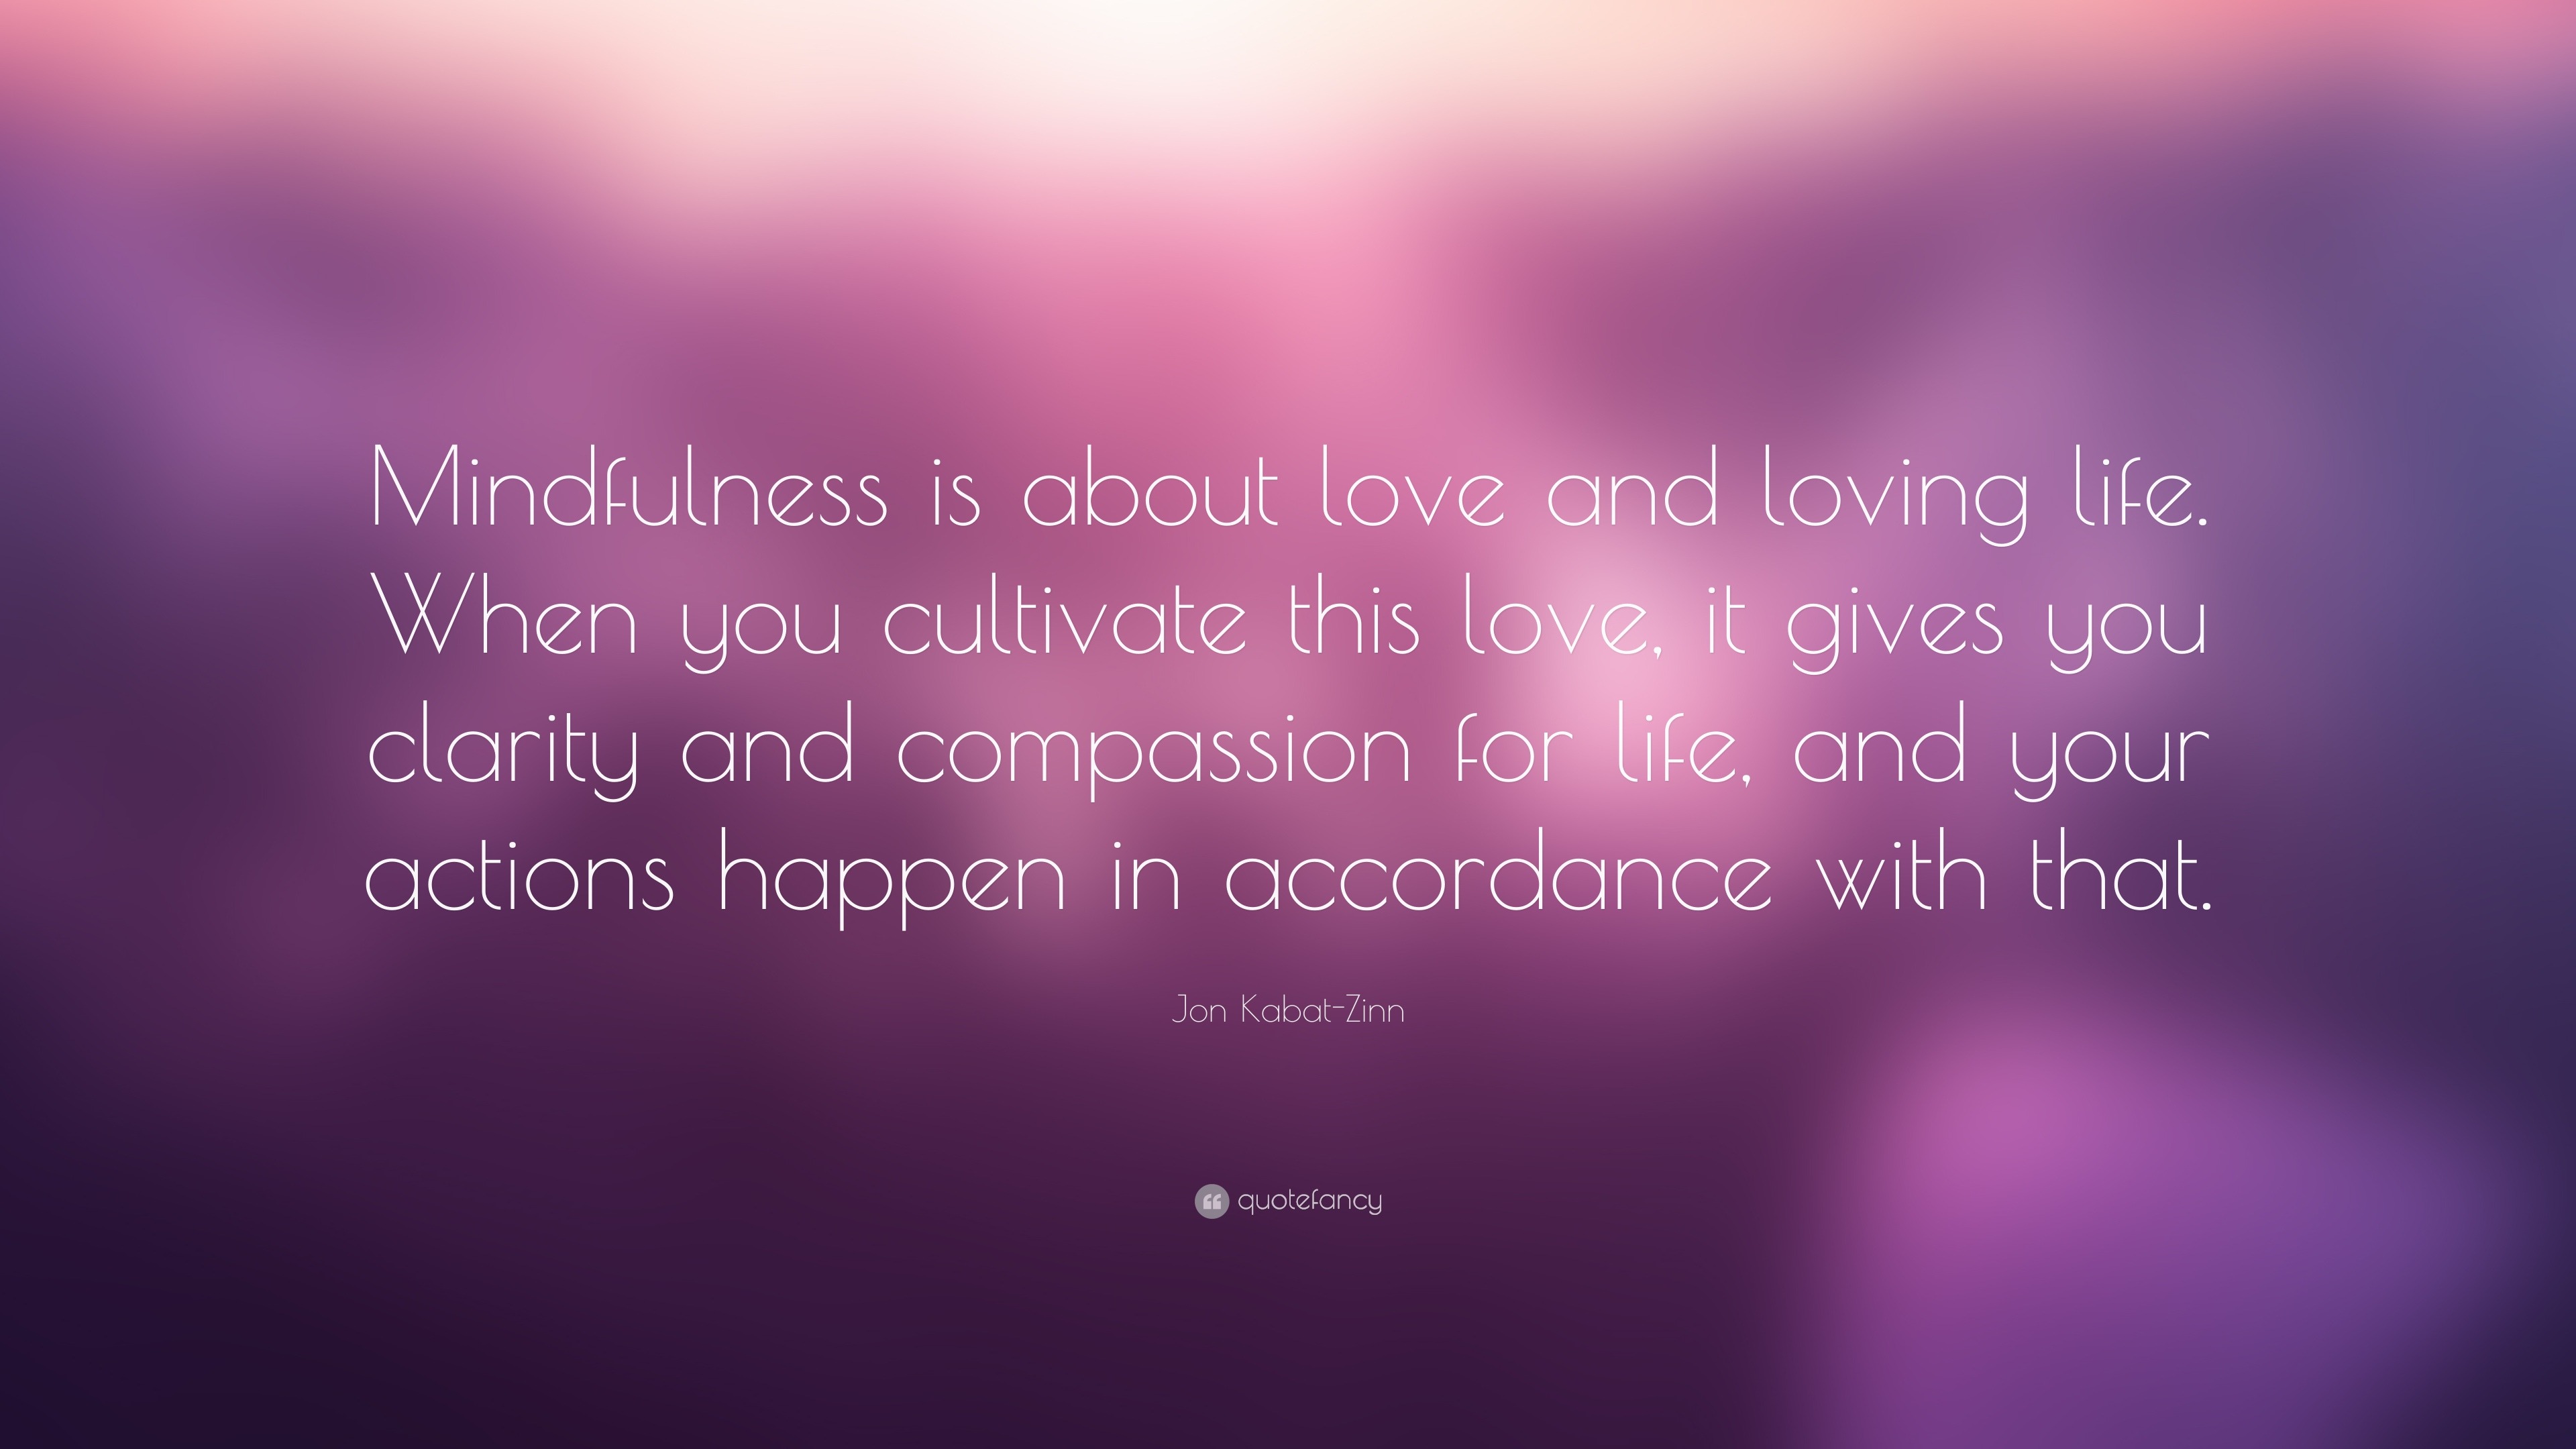 Jon Kabat-Zinn Quote: “Mindfulness is about love and loving life. When ...